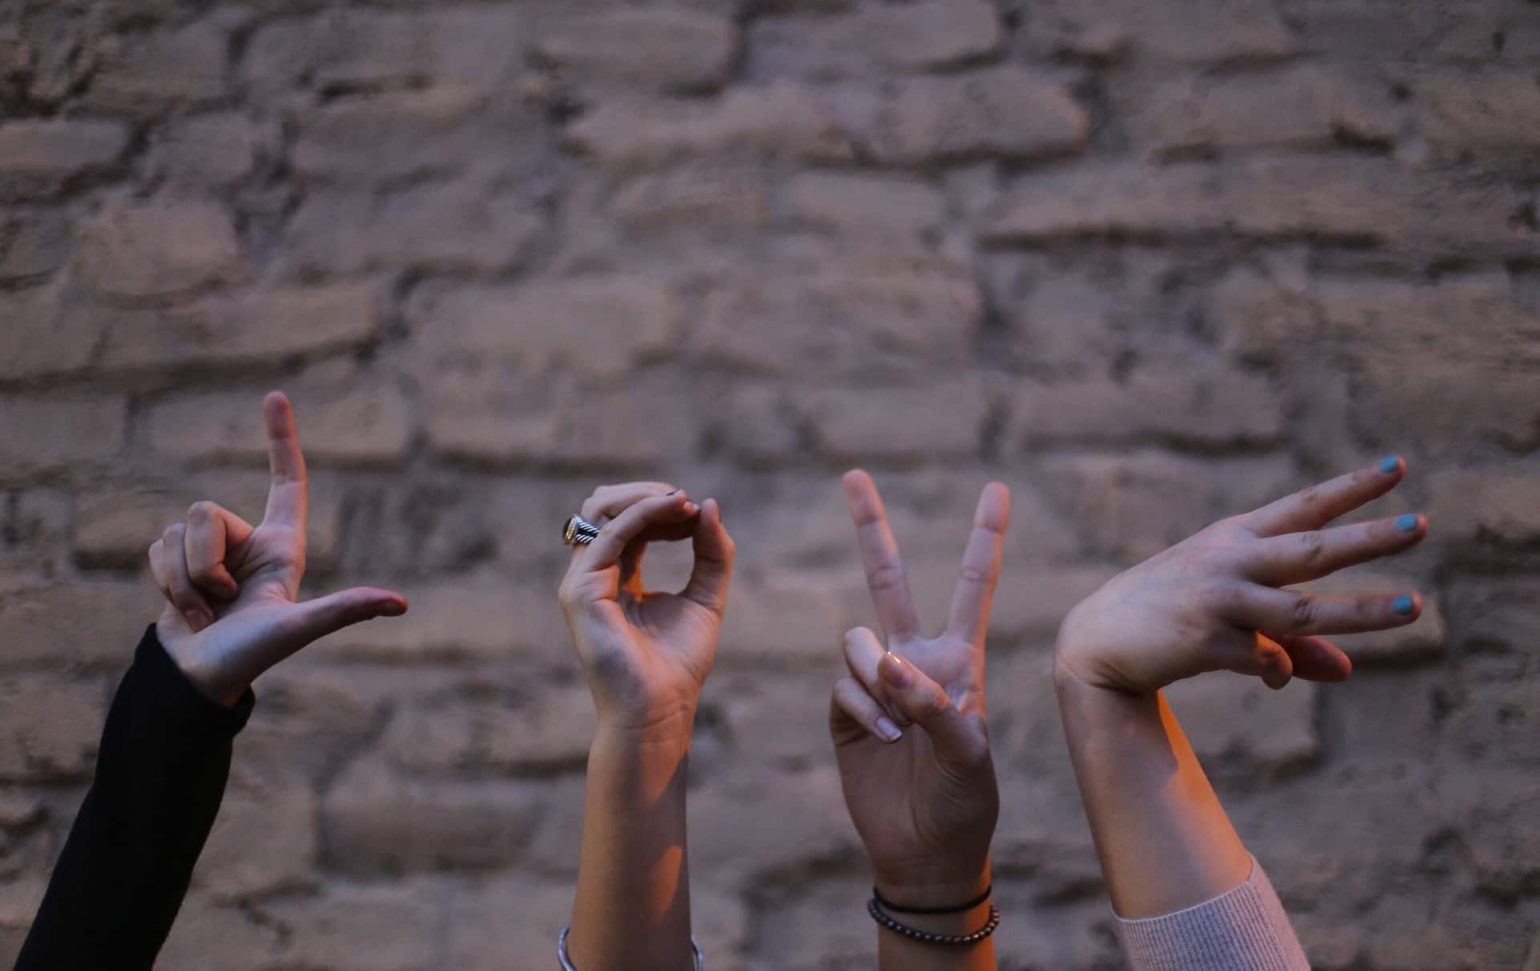 images of 4 people hands up in the arm in front of a brick wall making the letter L, O, V, E